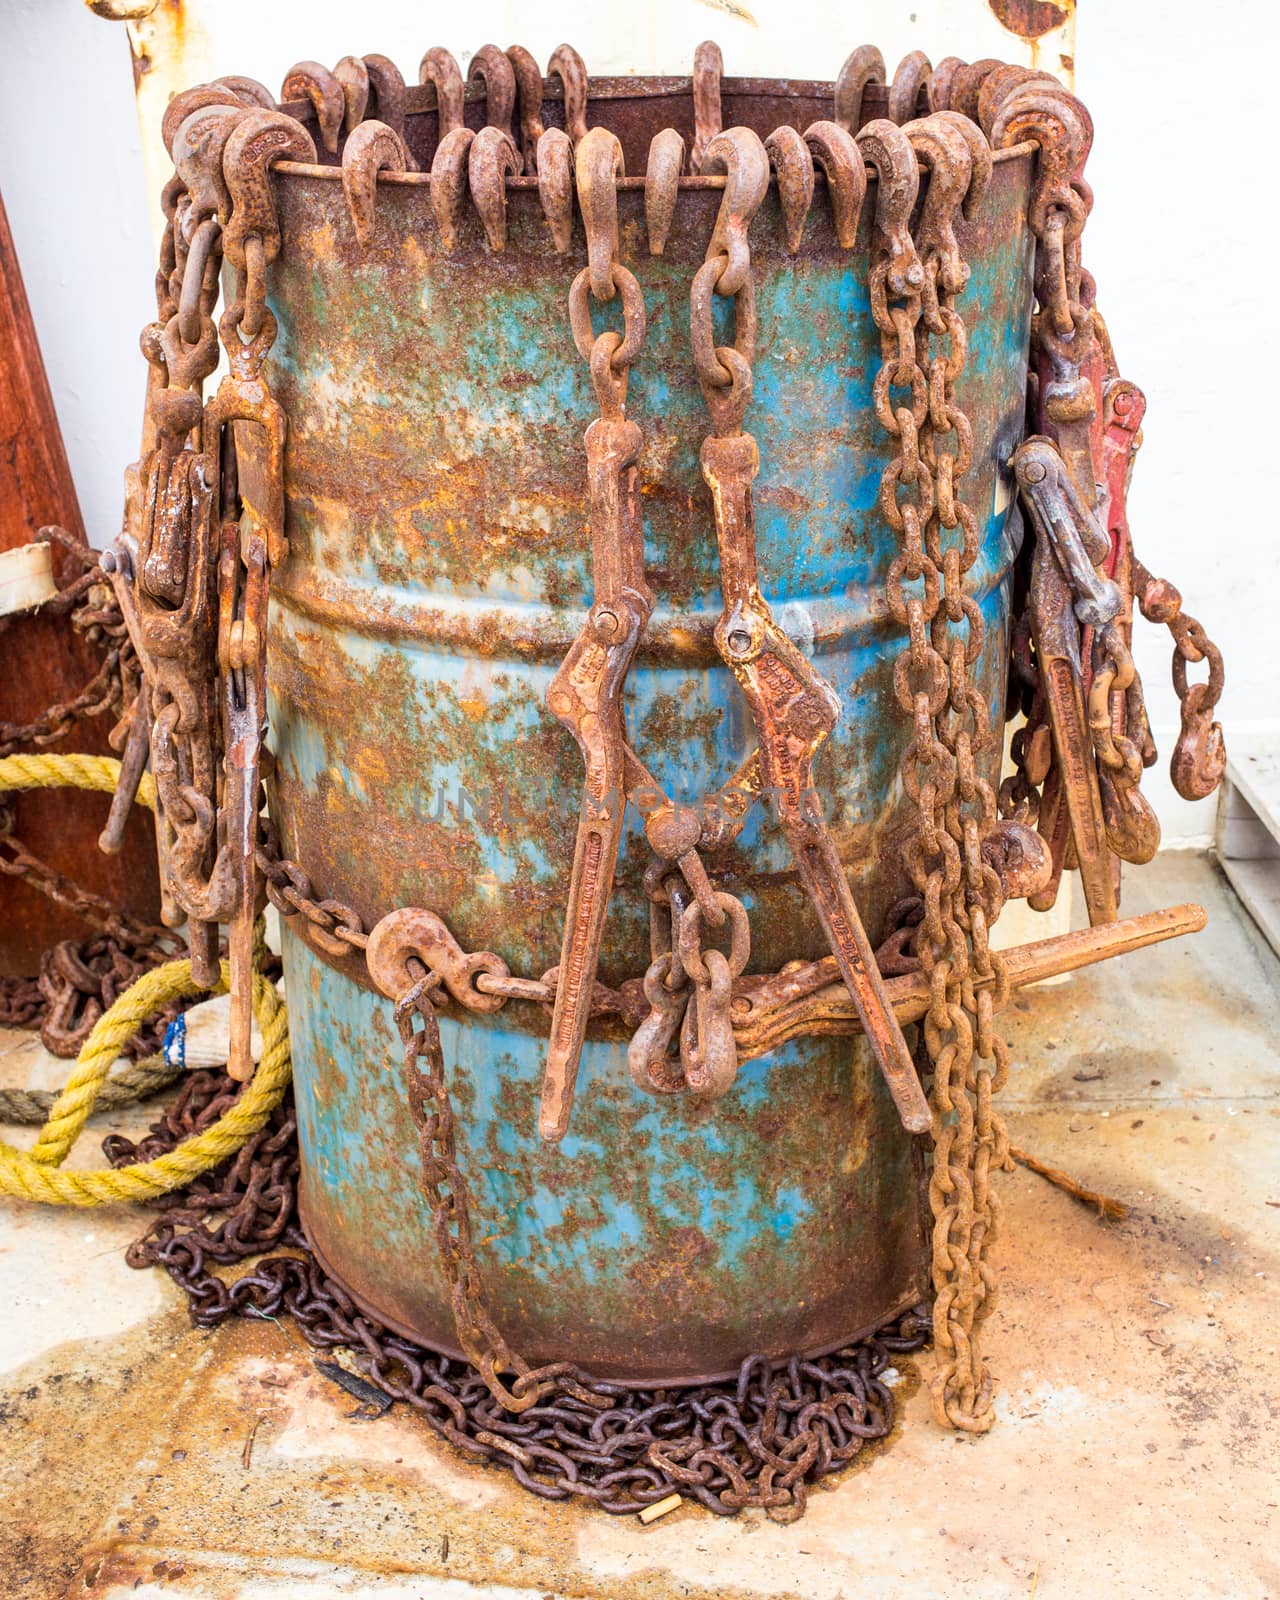 Rusty chains in a barrel